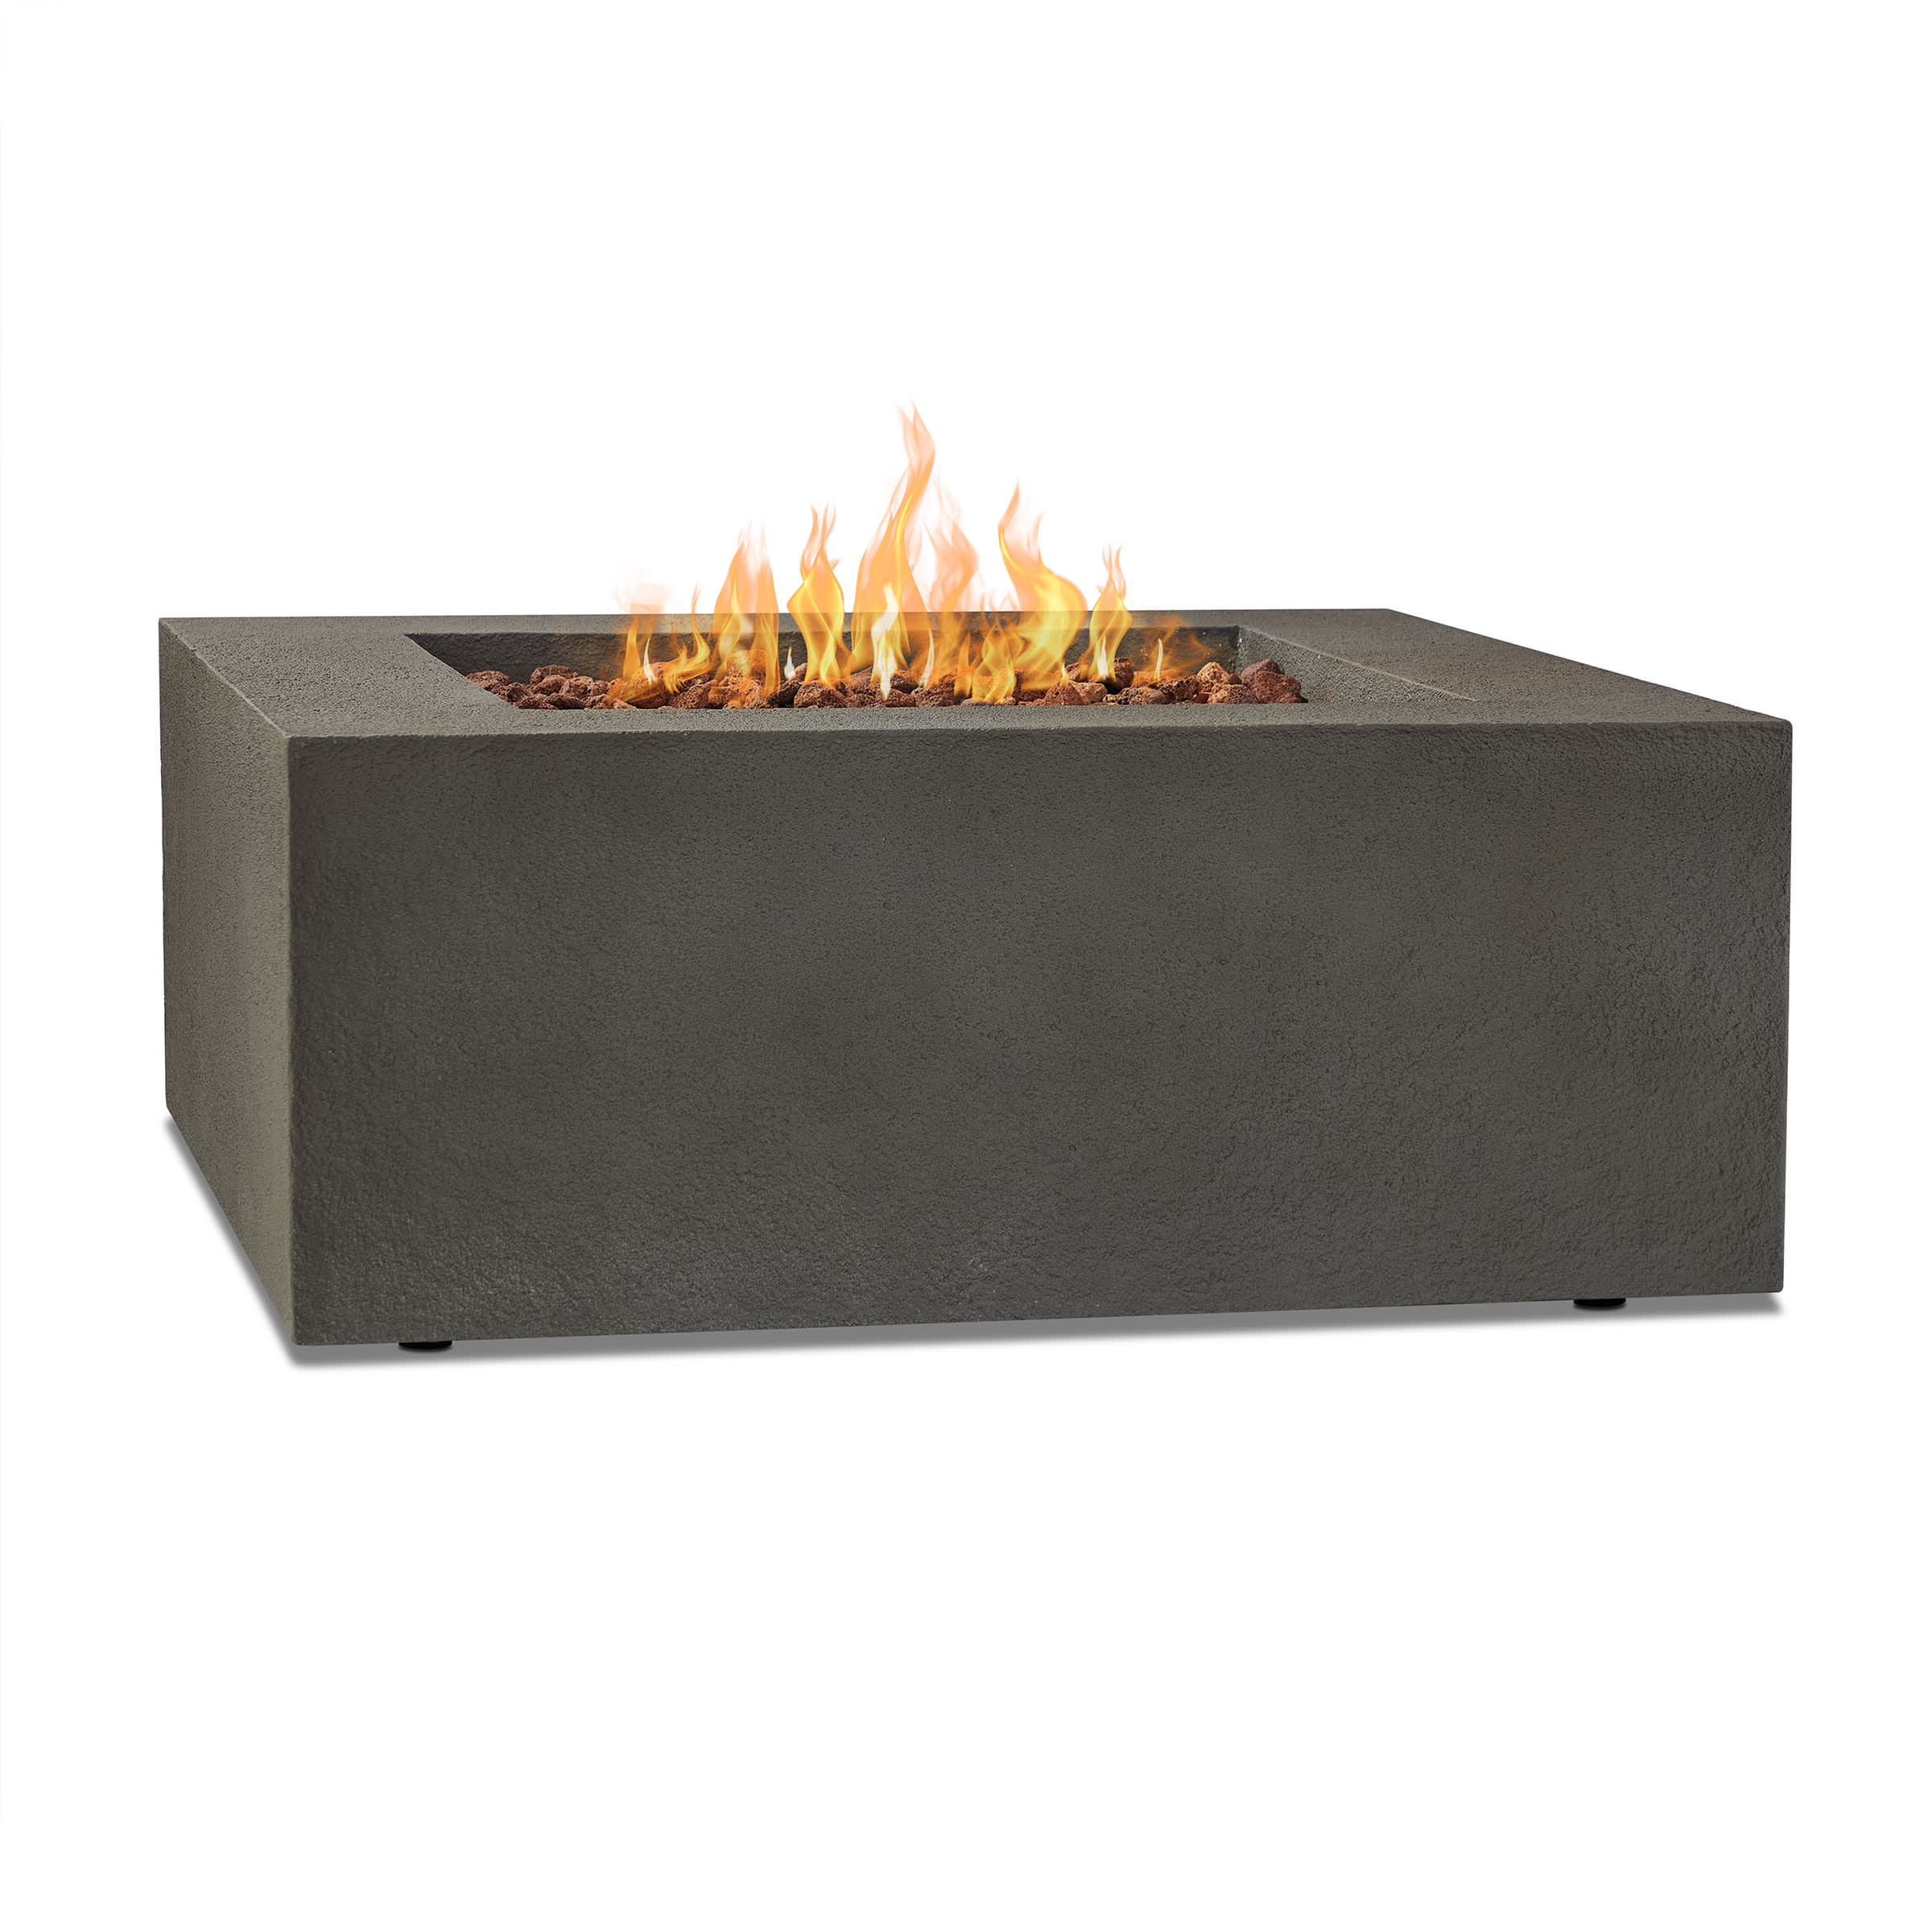 Real Flame Firepits Outdoor Living 9720ng, Real Flame Fire Pit